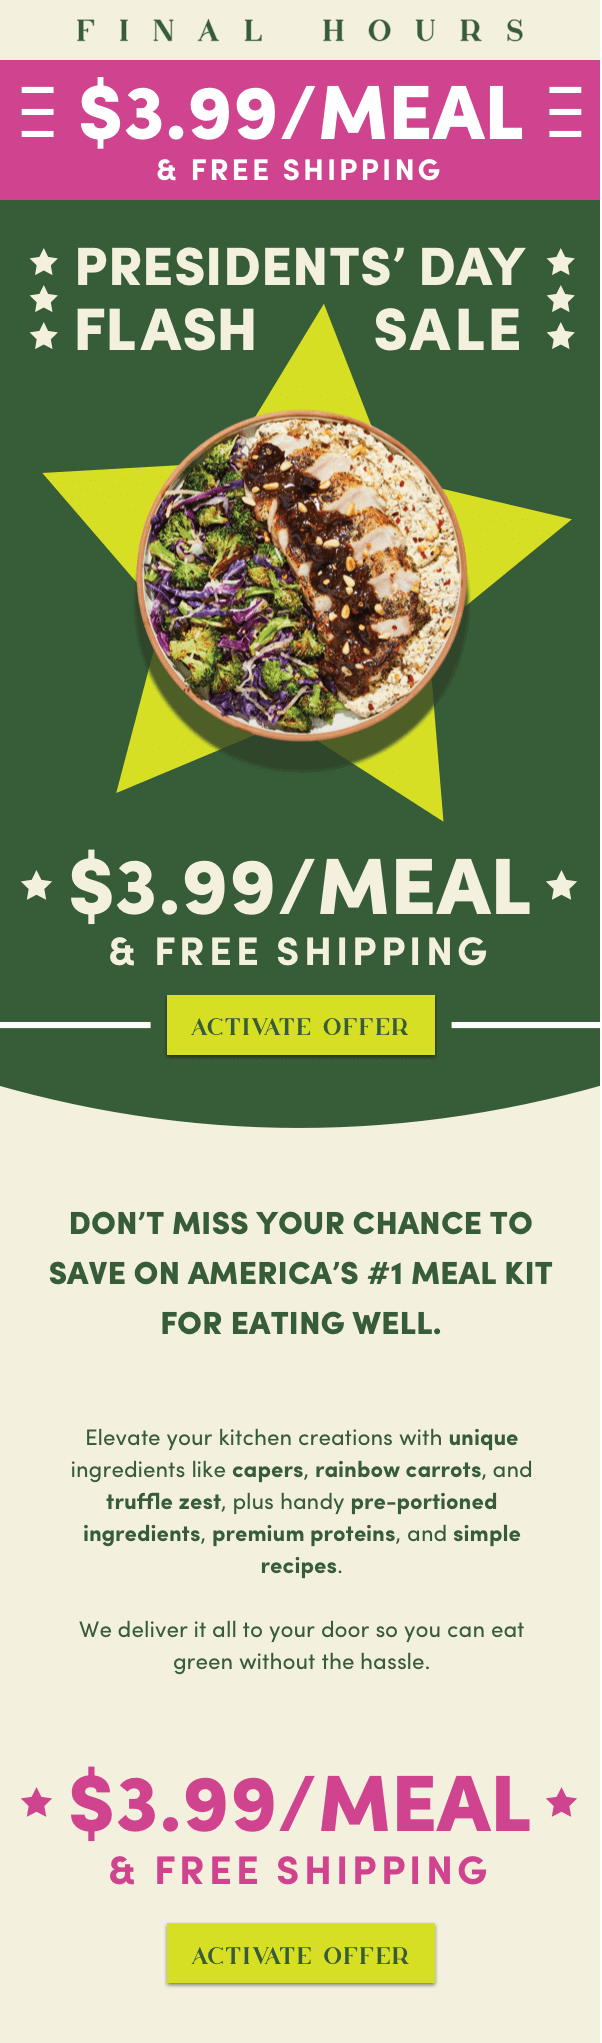 Final Hours - Presidents' Day Flash Sale: $3.99/Meal + Free Shipping | Activate Offer